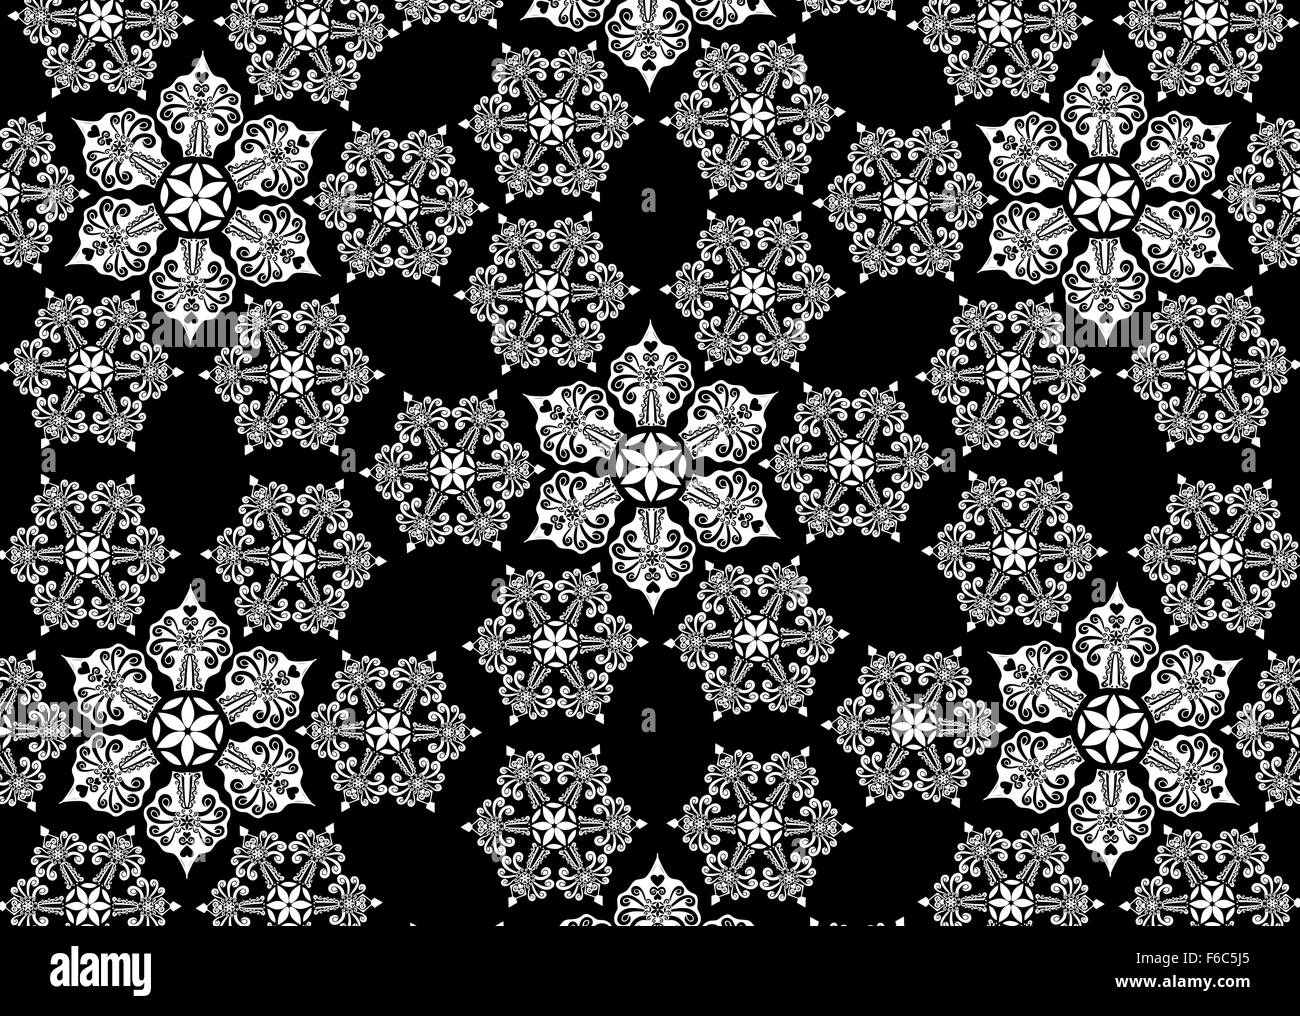 Snowflake background Black and White Stock Photos & Images - Alamy